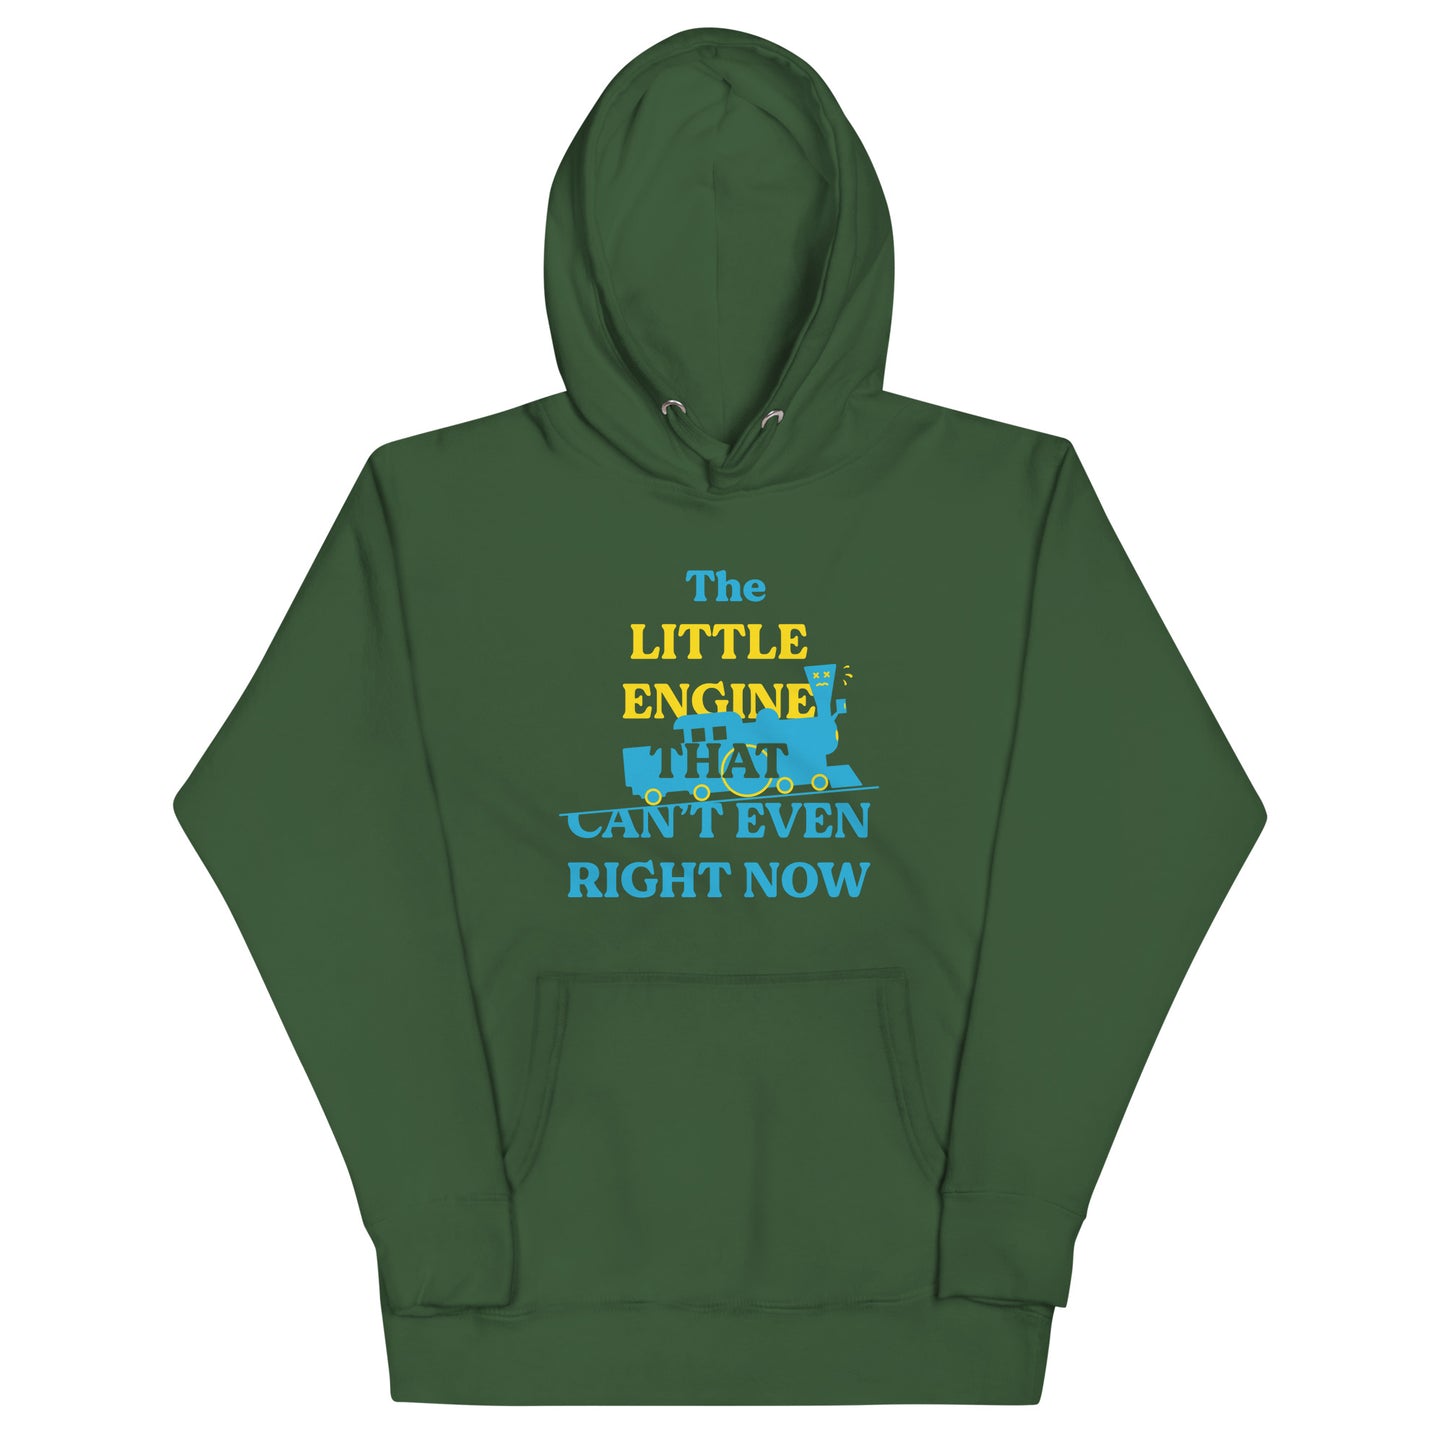 The Little Engine That Can't Even Right Now Unisex Hoodie